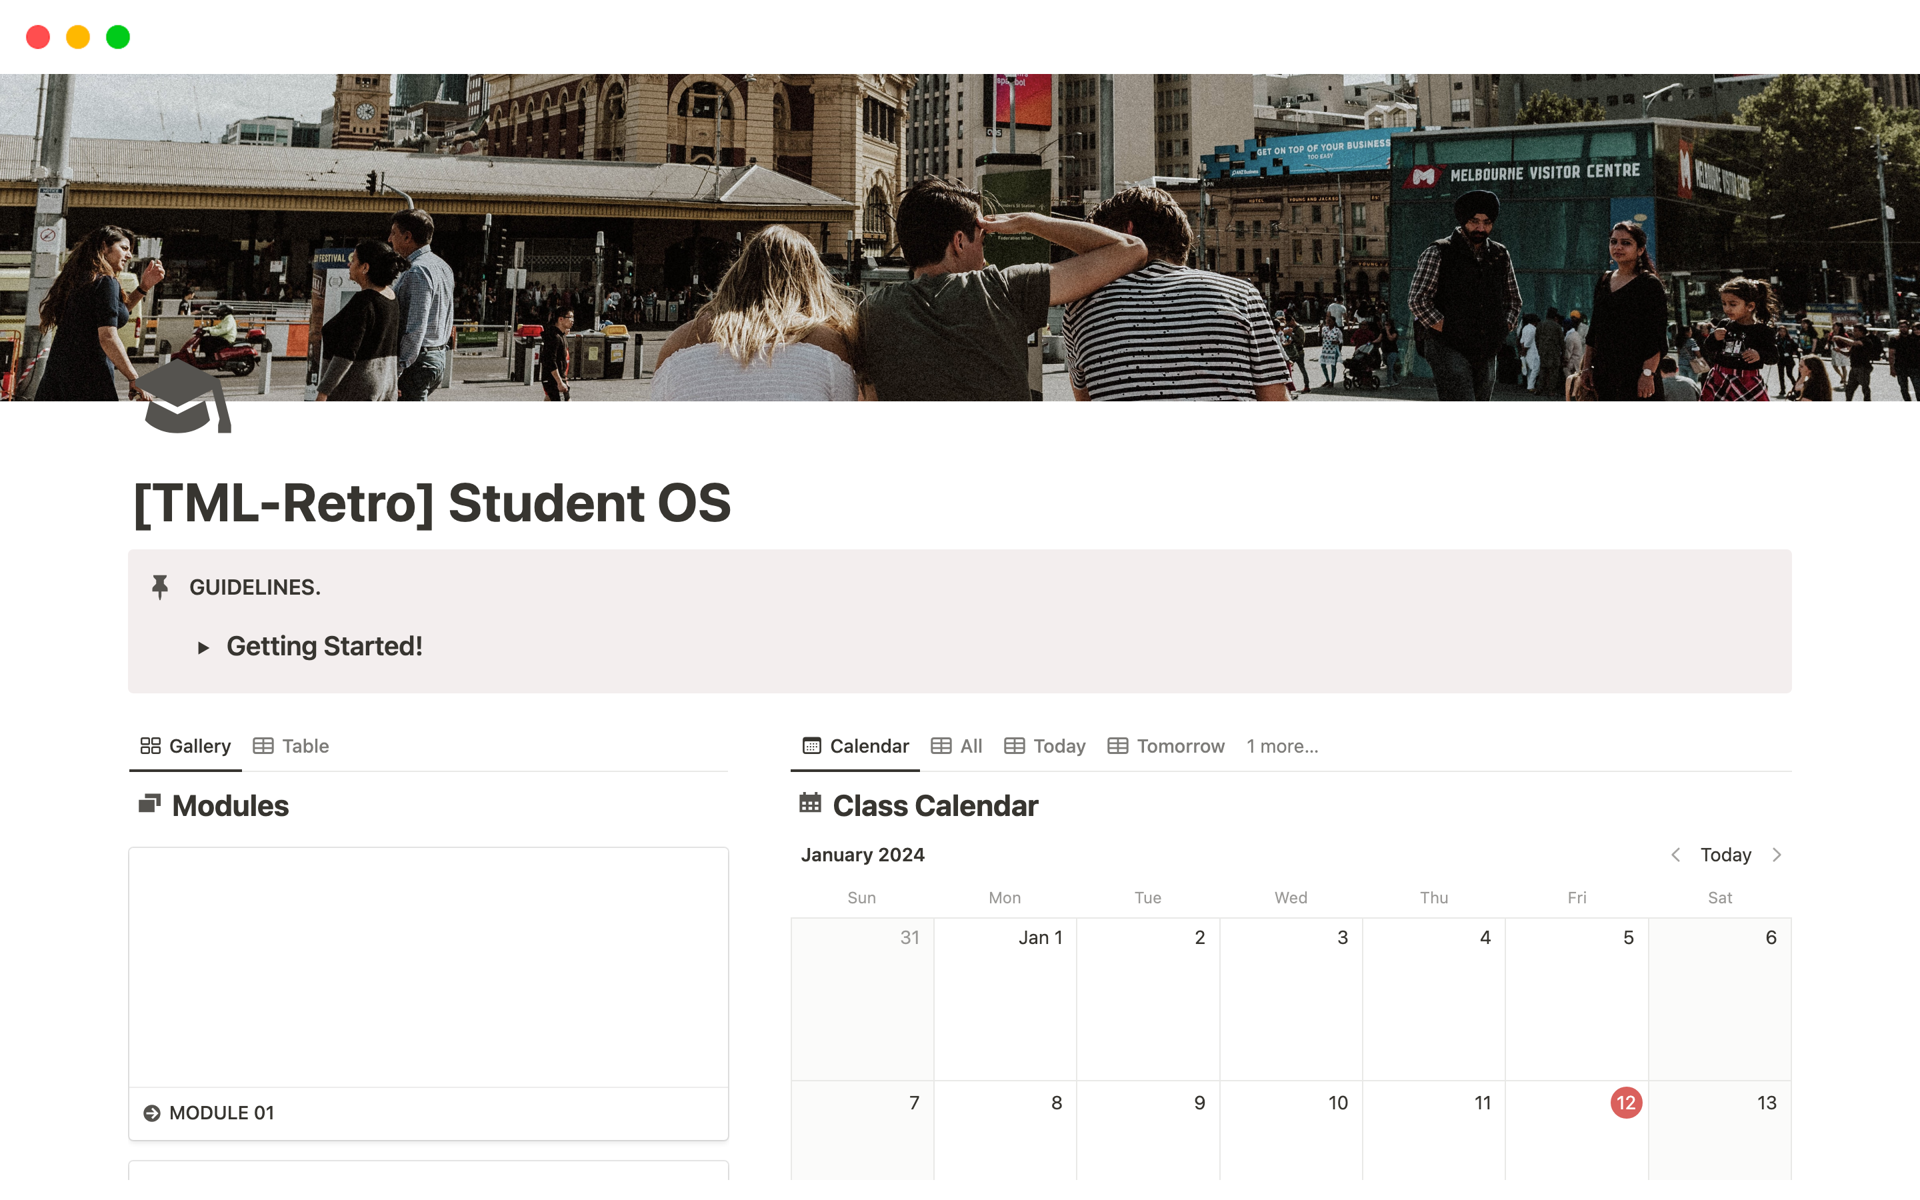 Student OS offers Interconnected Databases, Data Filters for Module & Lecture, Spotify Playlist Section, Module, Schoolwork, Examinations, and To Dos Tracker, Calendar & Schedules, Lecture & Module Templates, University Info Section, and Professors & Staff contact Info.